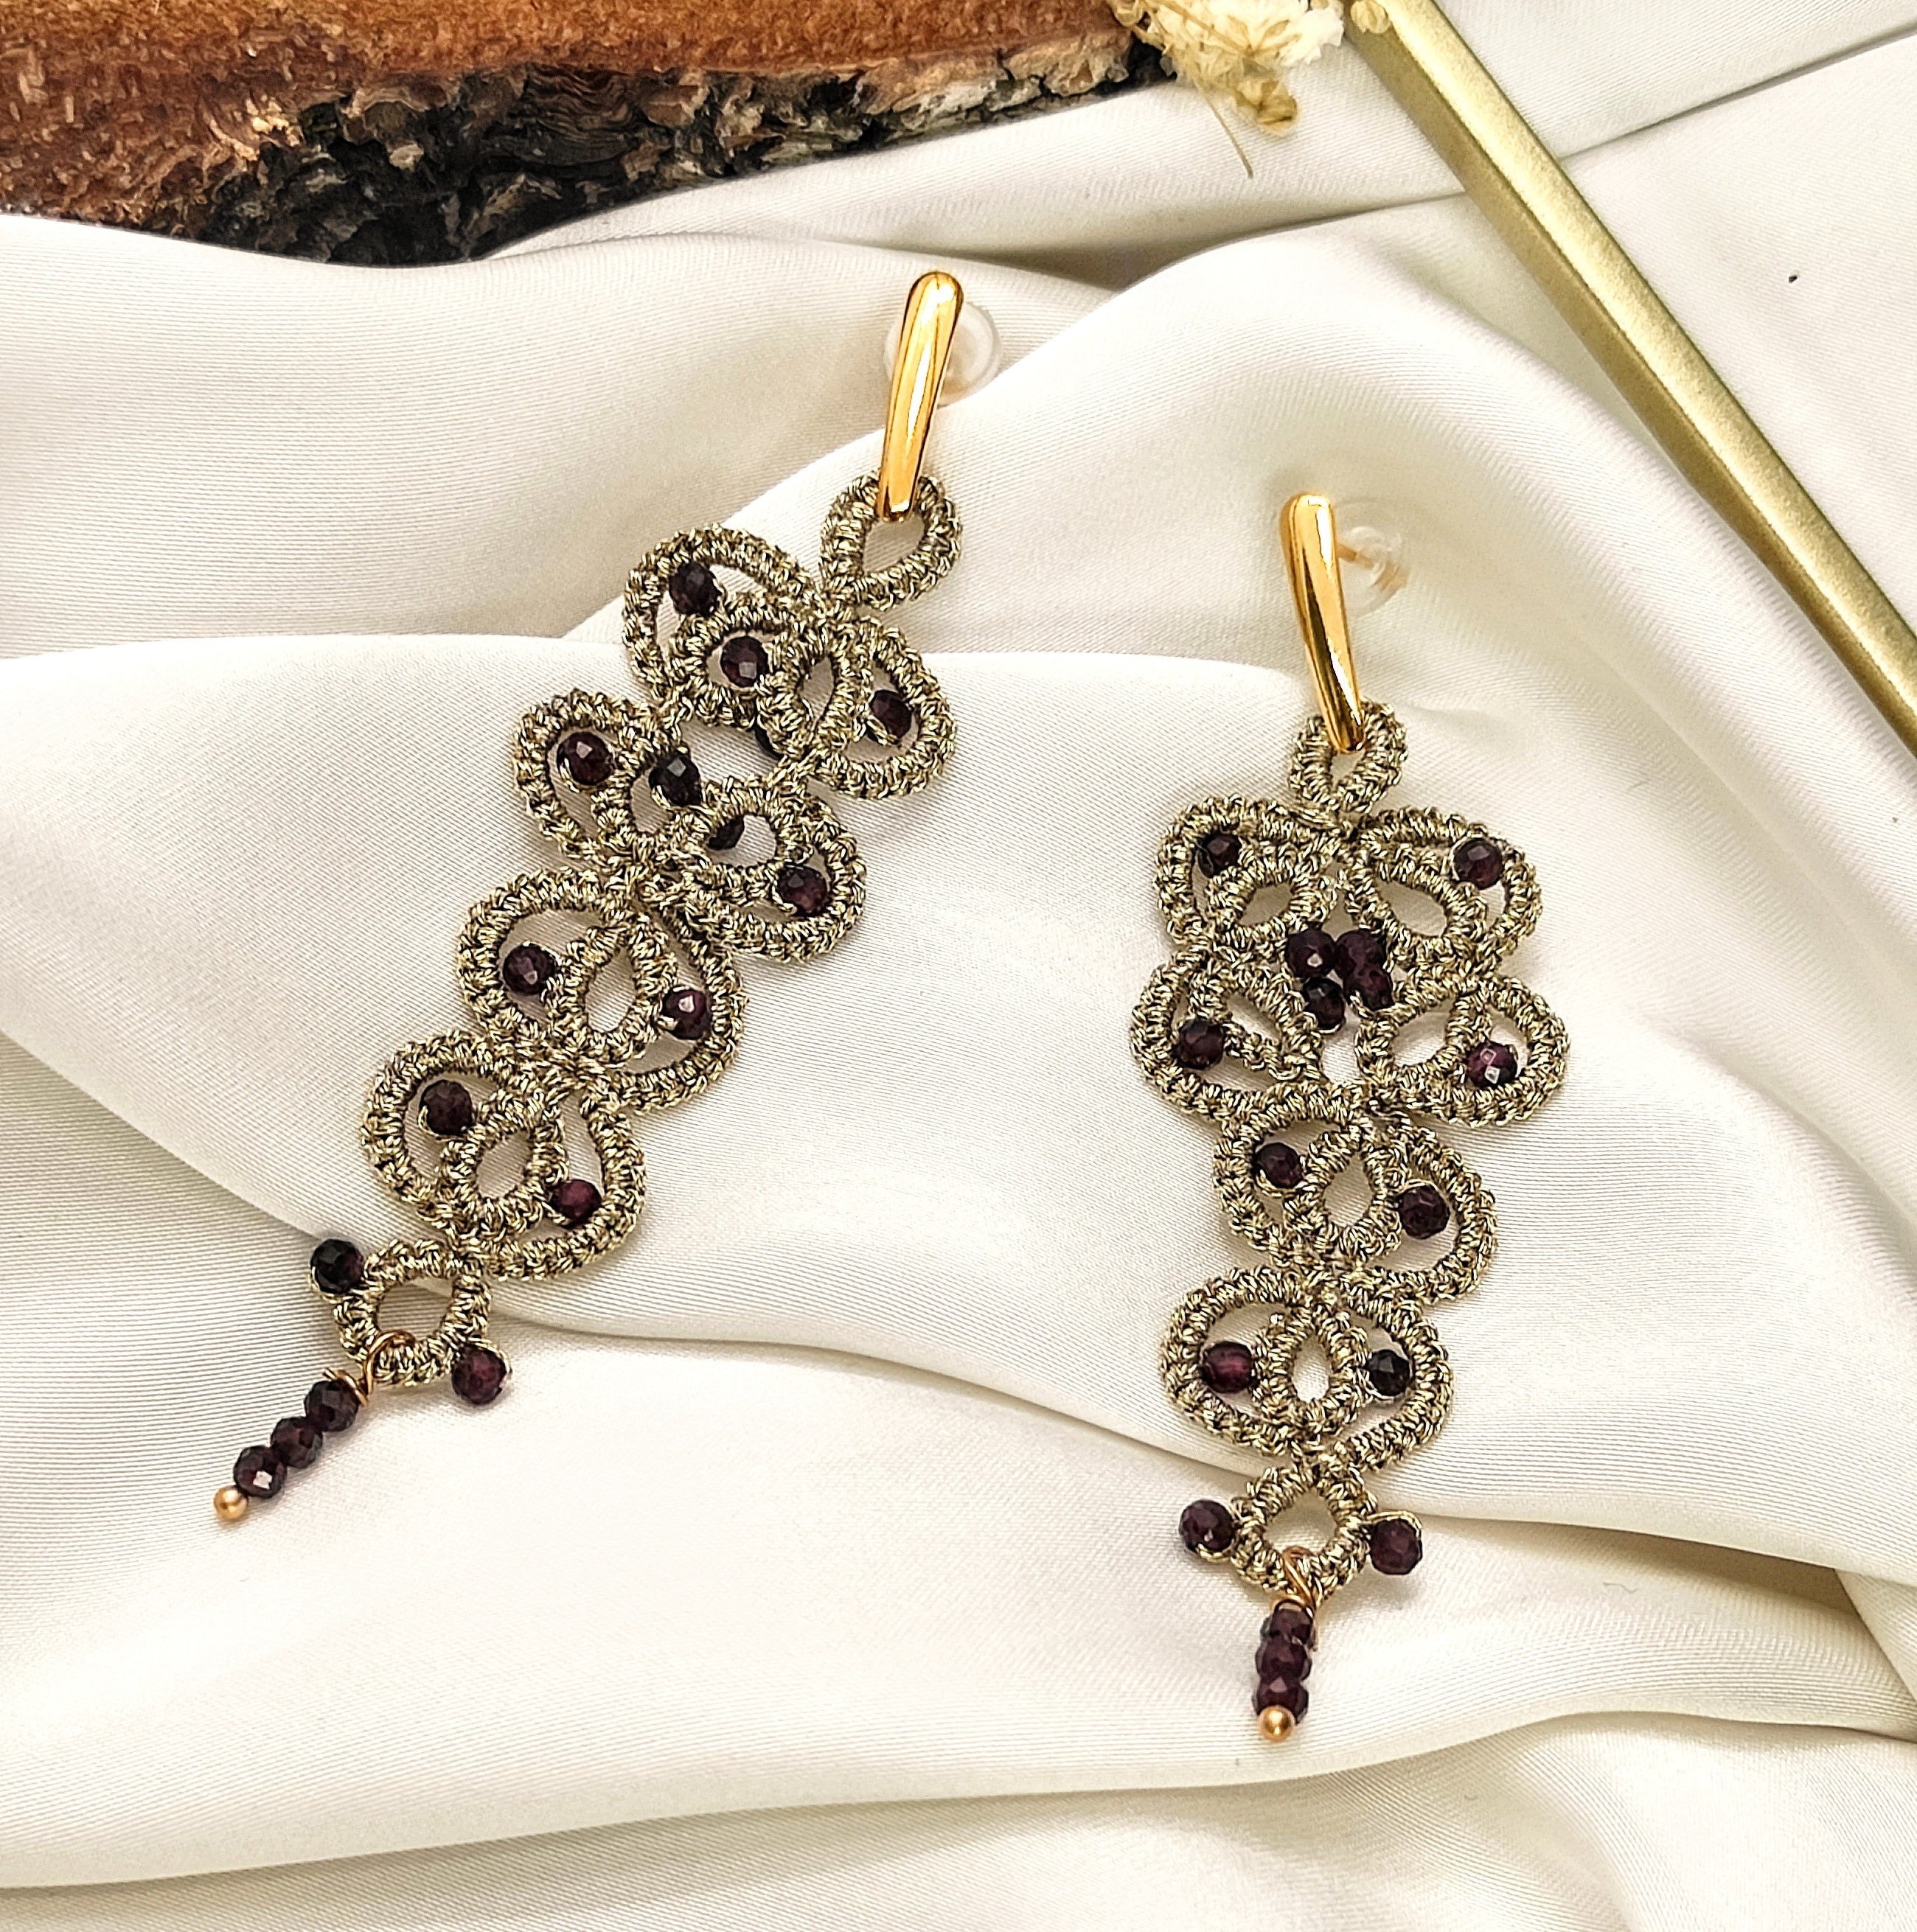 MYRIAM. Frivolity lace earrings and glass stones.